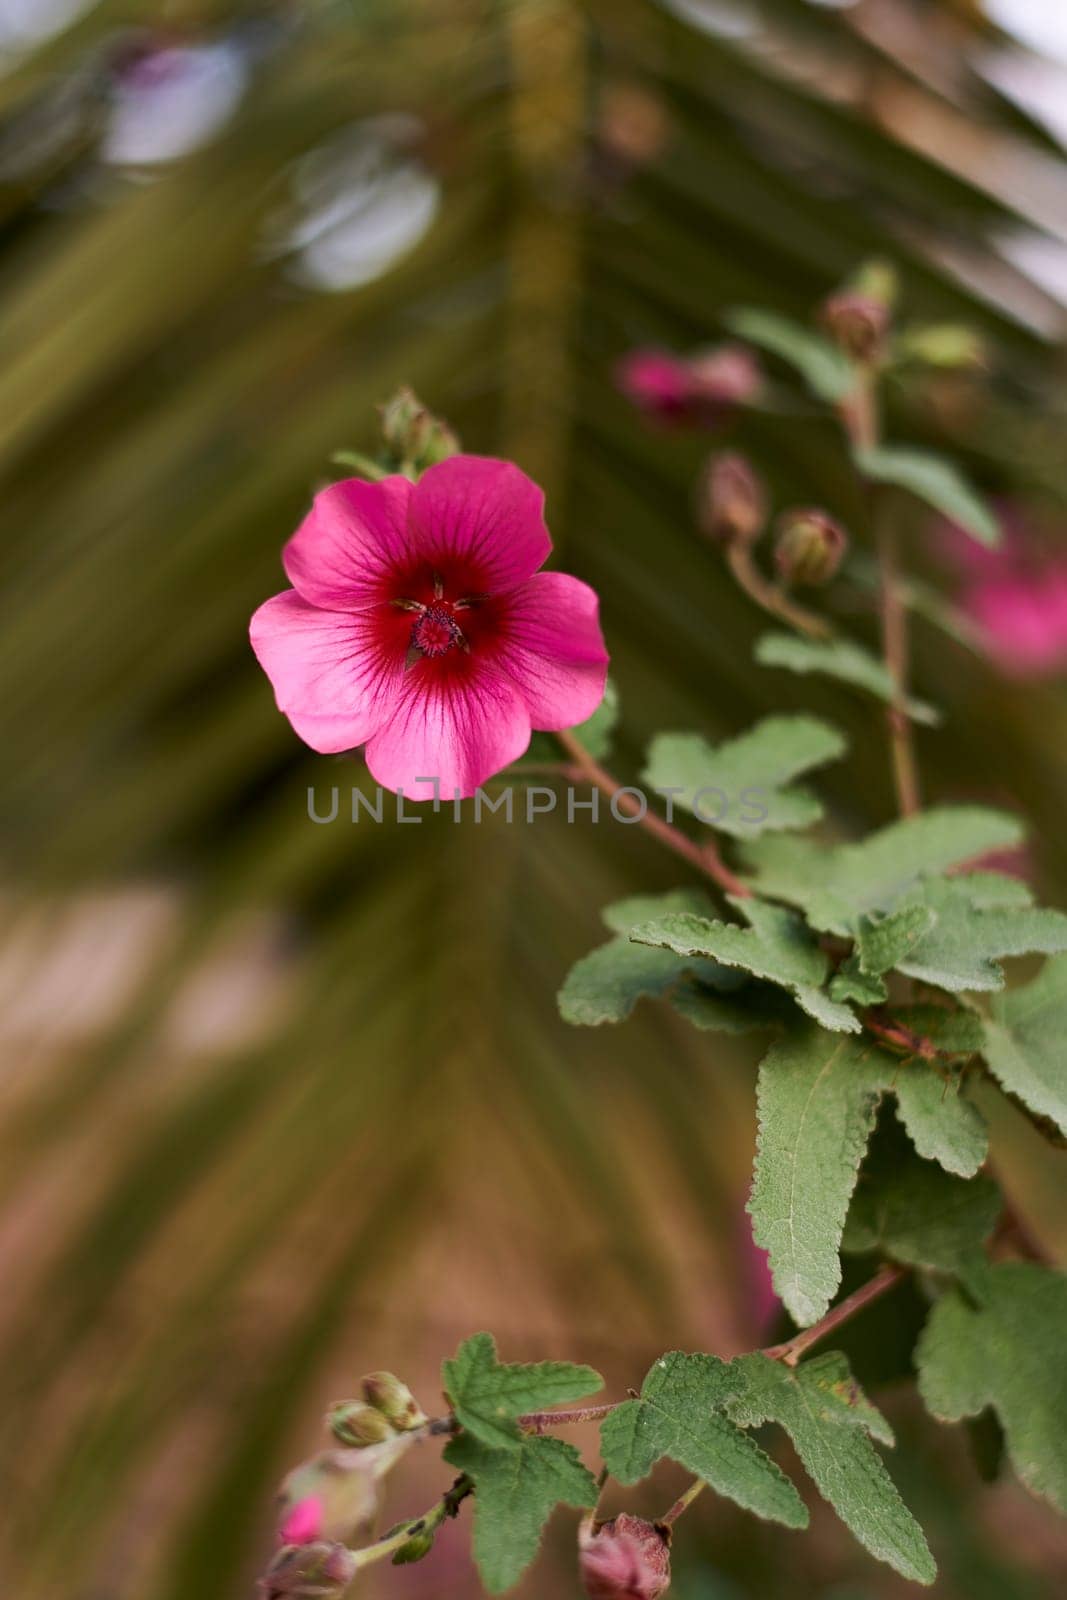 Arbolico's Mallow flower, pink with blurred background by raul_ruiz